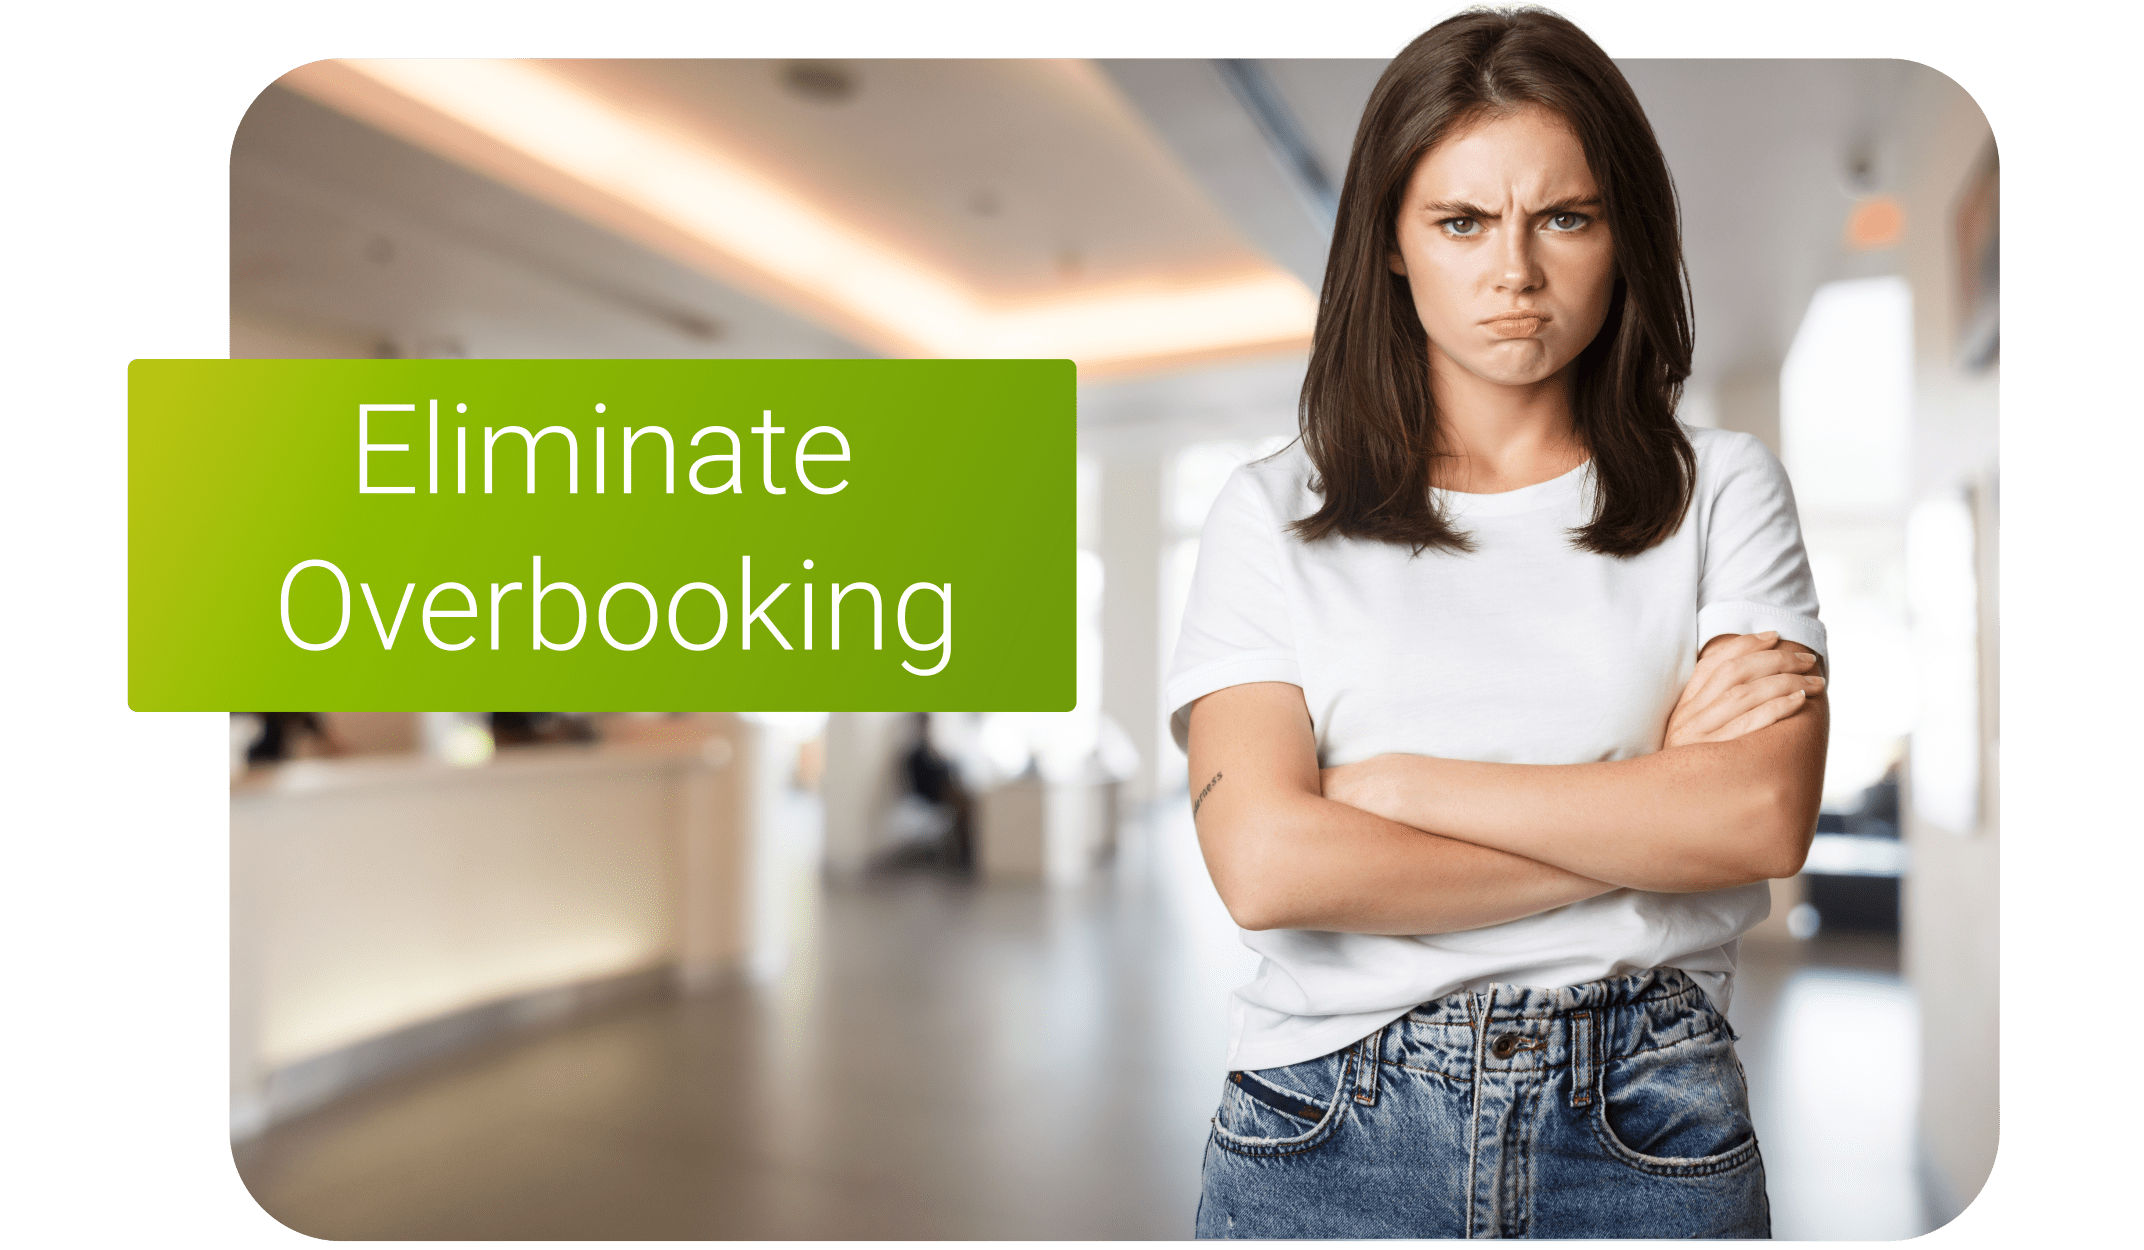 Eliminate overbooking